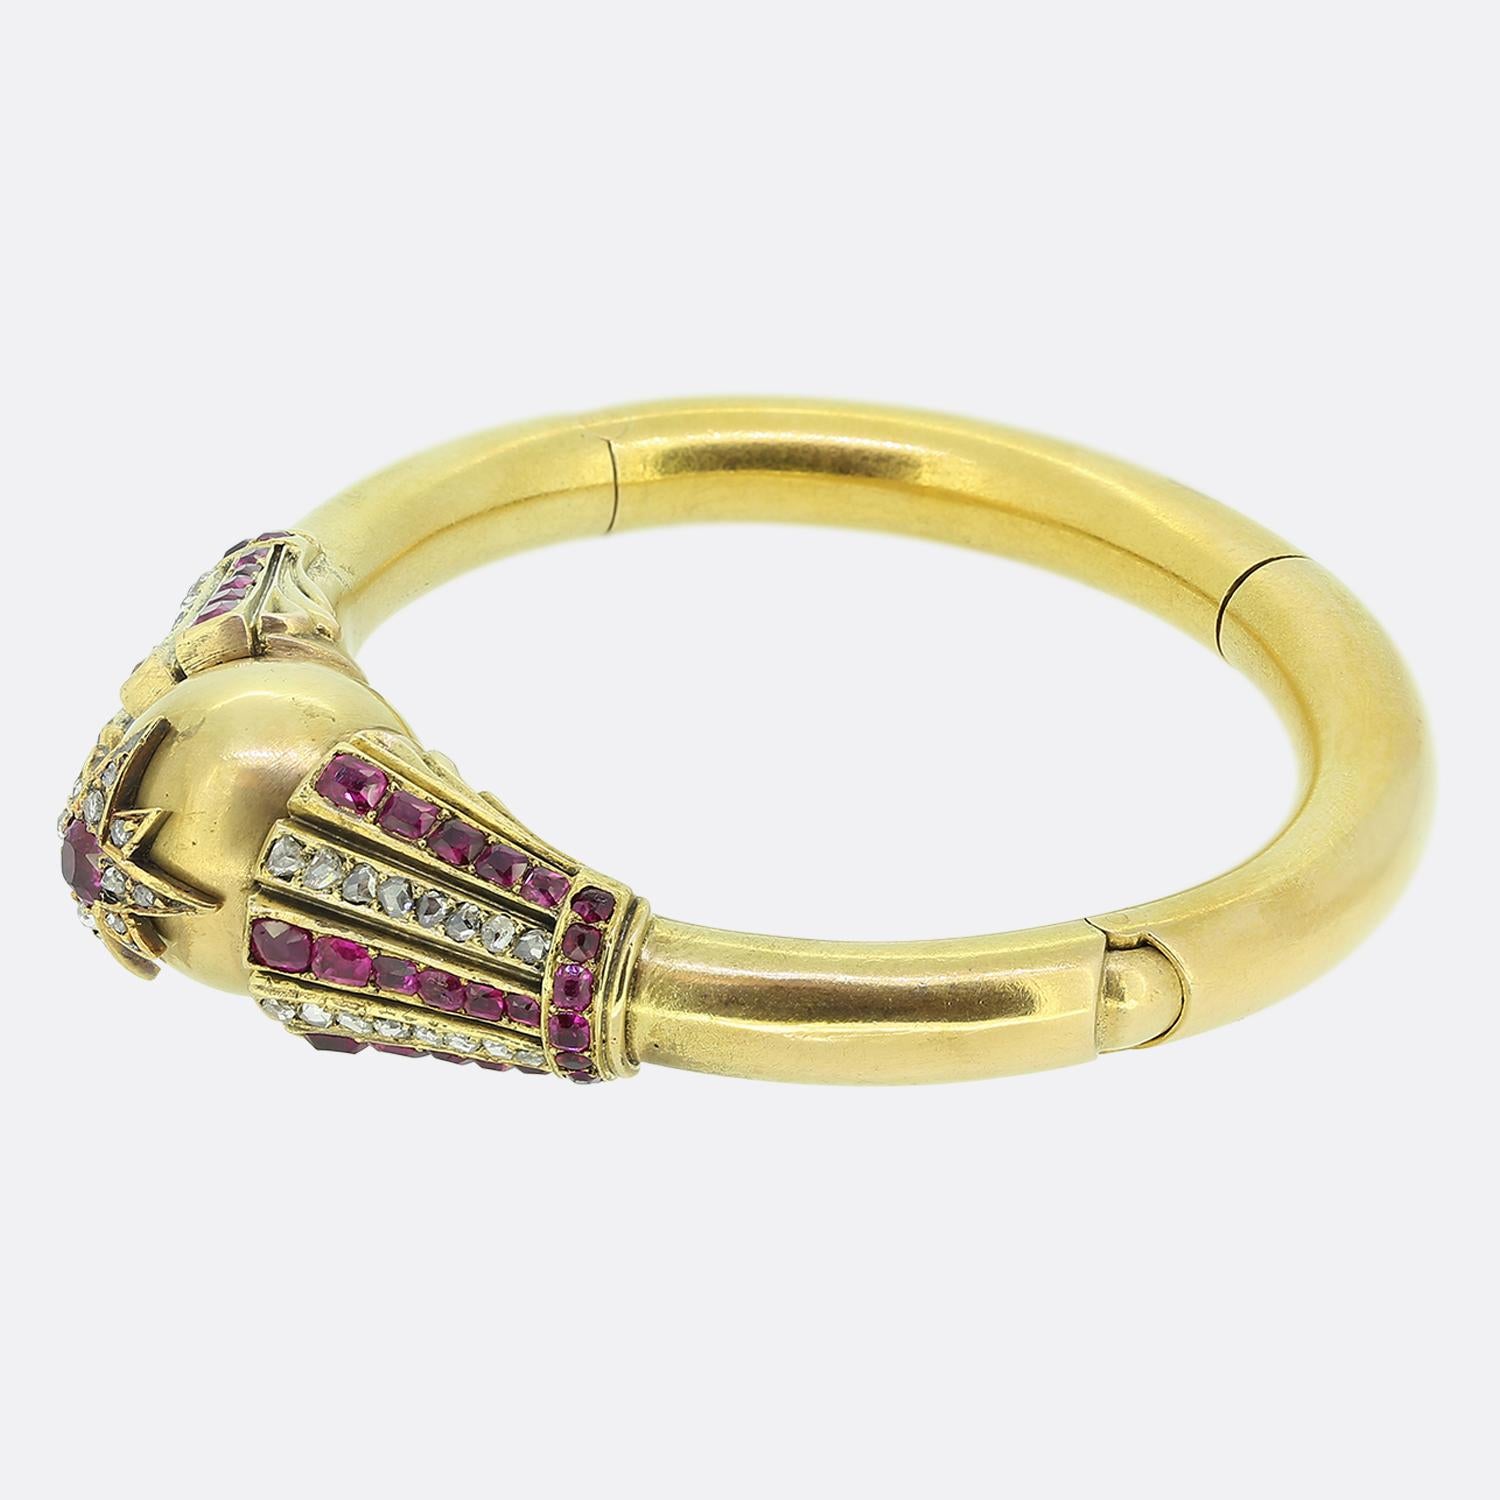 Here we have an outstanding bangle taken from the Victorian era. This rich 18ct yellow gold piece boasts a unique design with a spherical face playing host to an eight-pointed star motif set with a round faceted pink Burmese ruby at the centre and